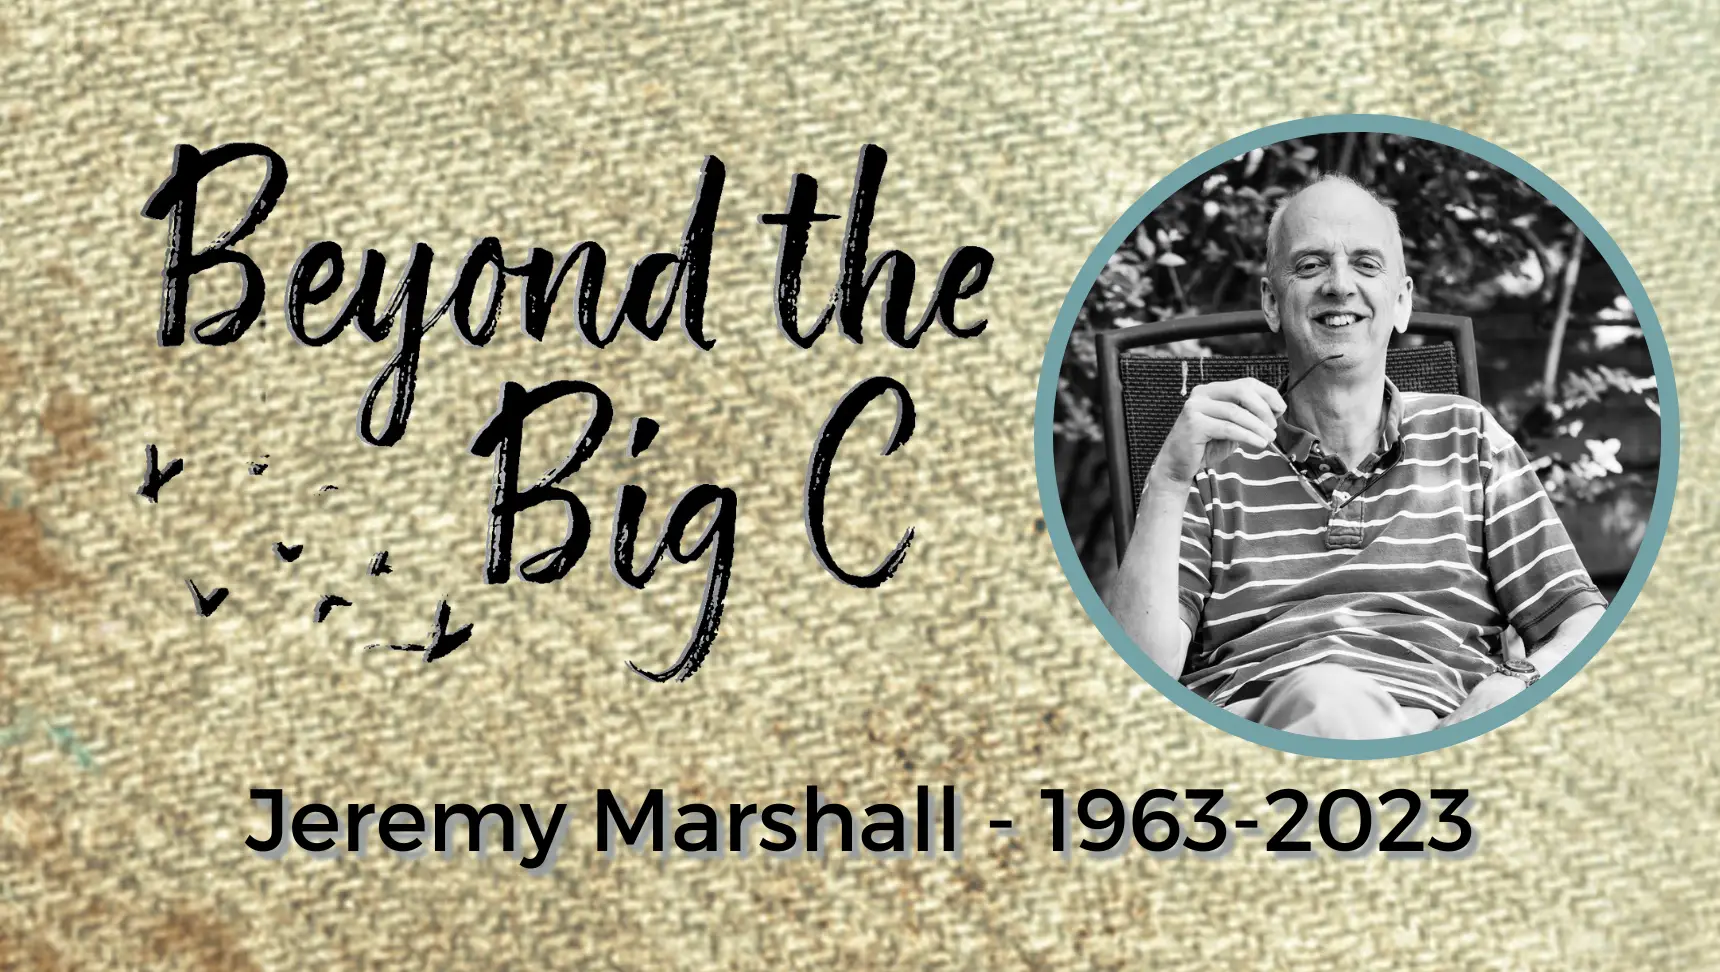 remembering-jeremy-marshall-blog-hpb.png